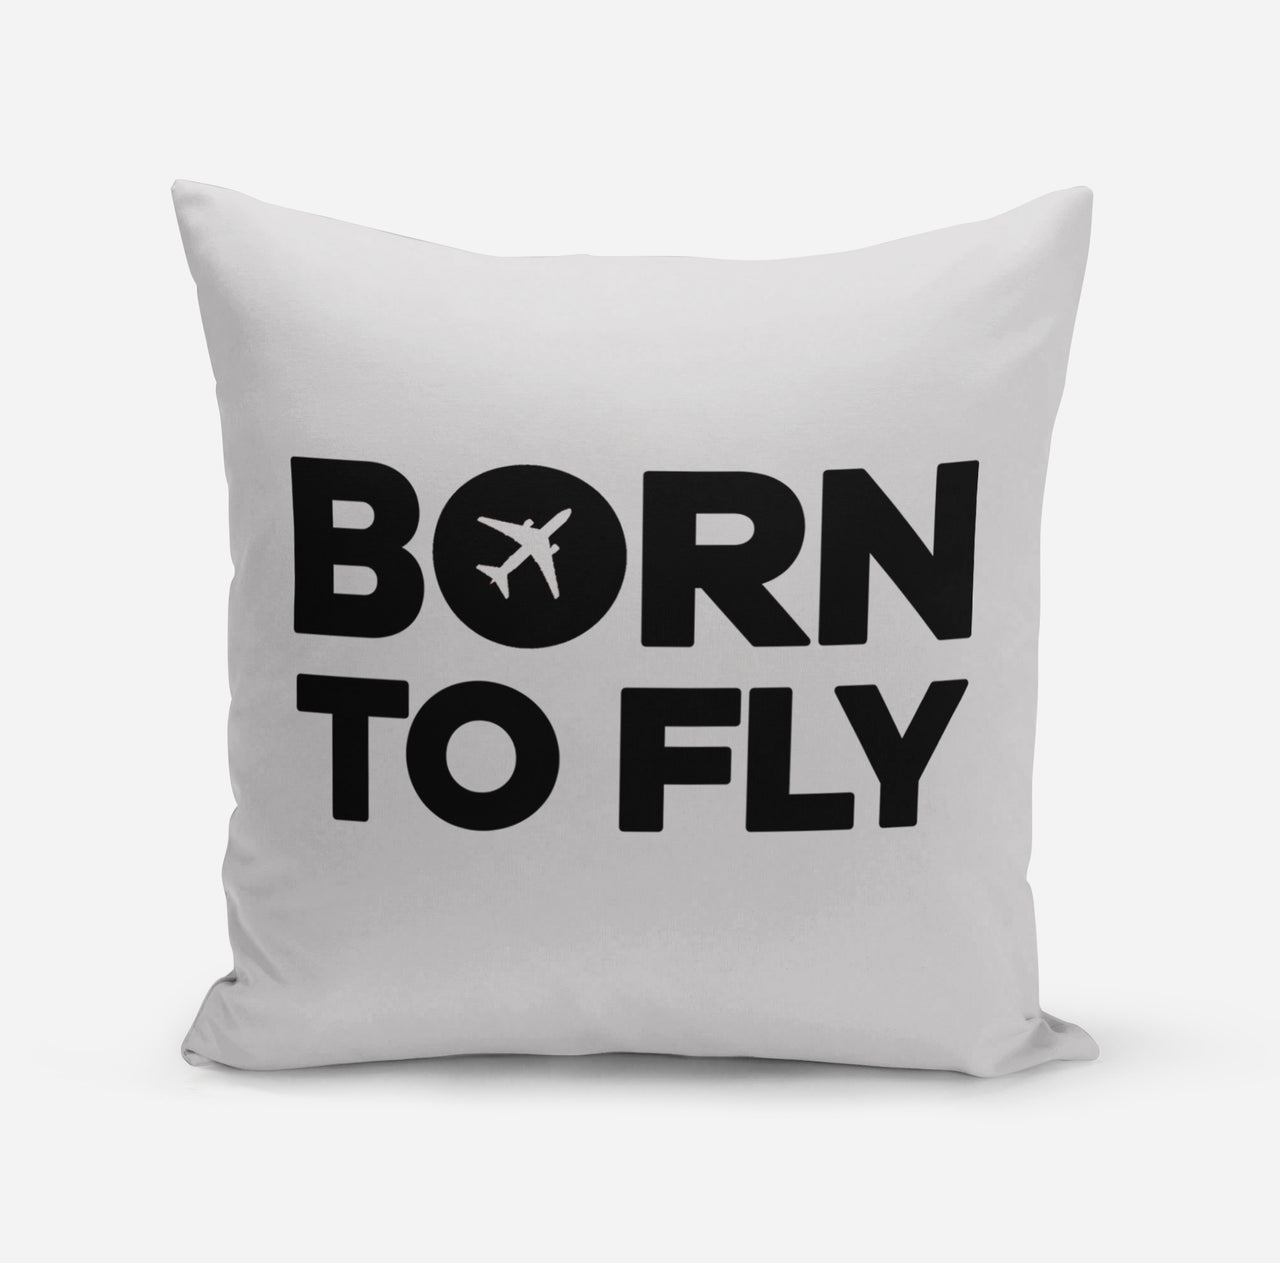 Born To Fly Special Designed Pillows